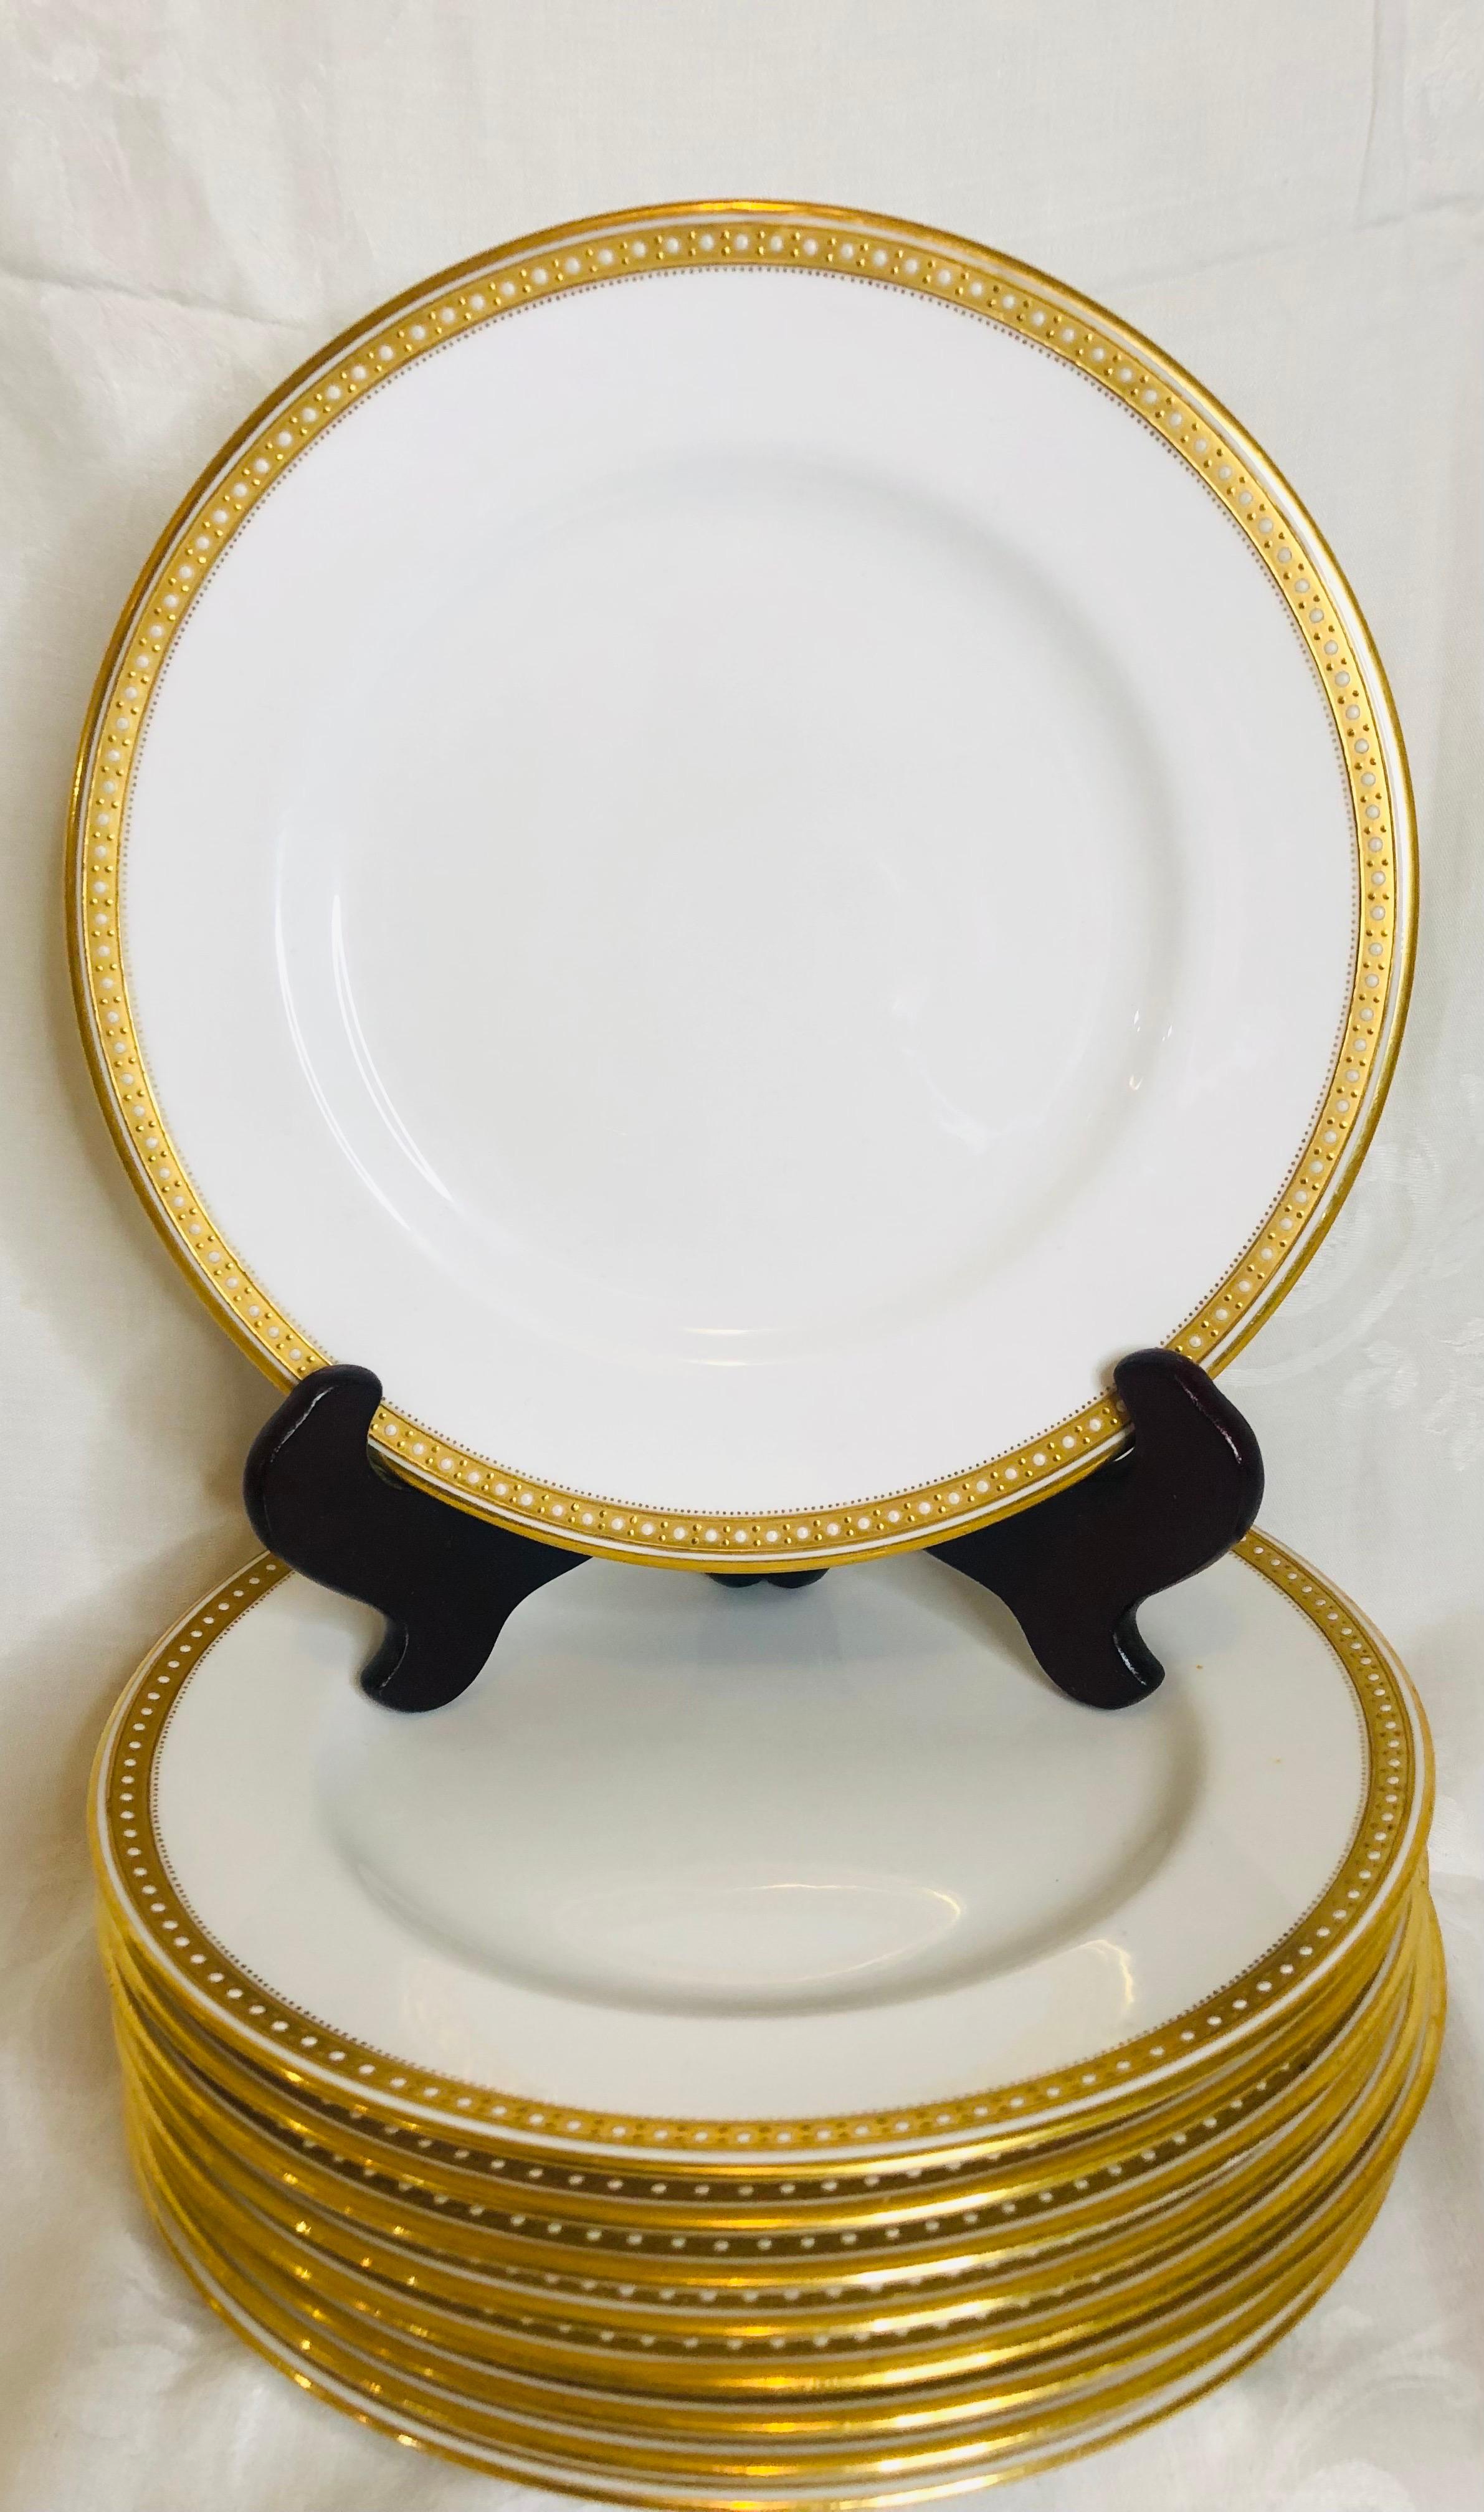 Early 20th Century 16 Copeland Spode Dinner Plates with Gold Rim & White Jeweling Made for T. Goode